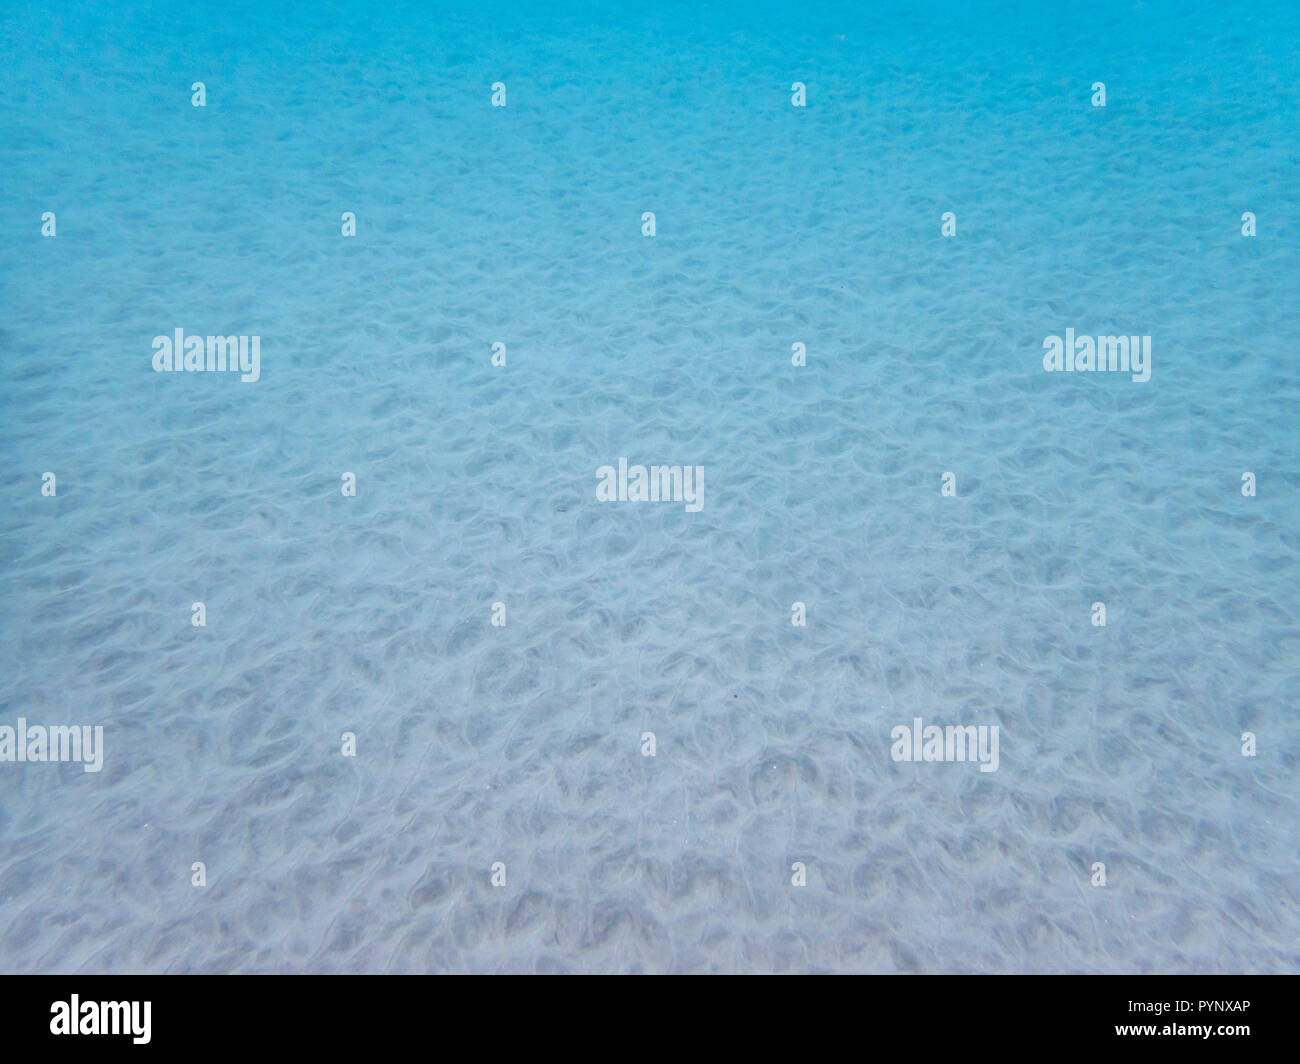 Ocean Floor Underwater With Patterns And Texture In Sand In Clear